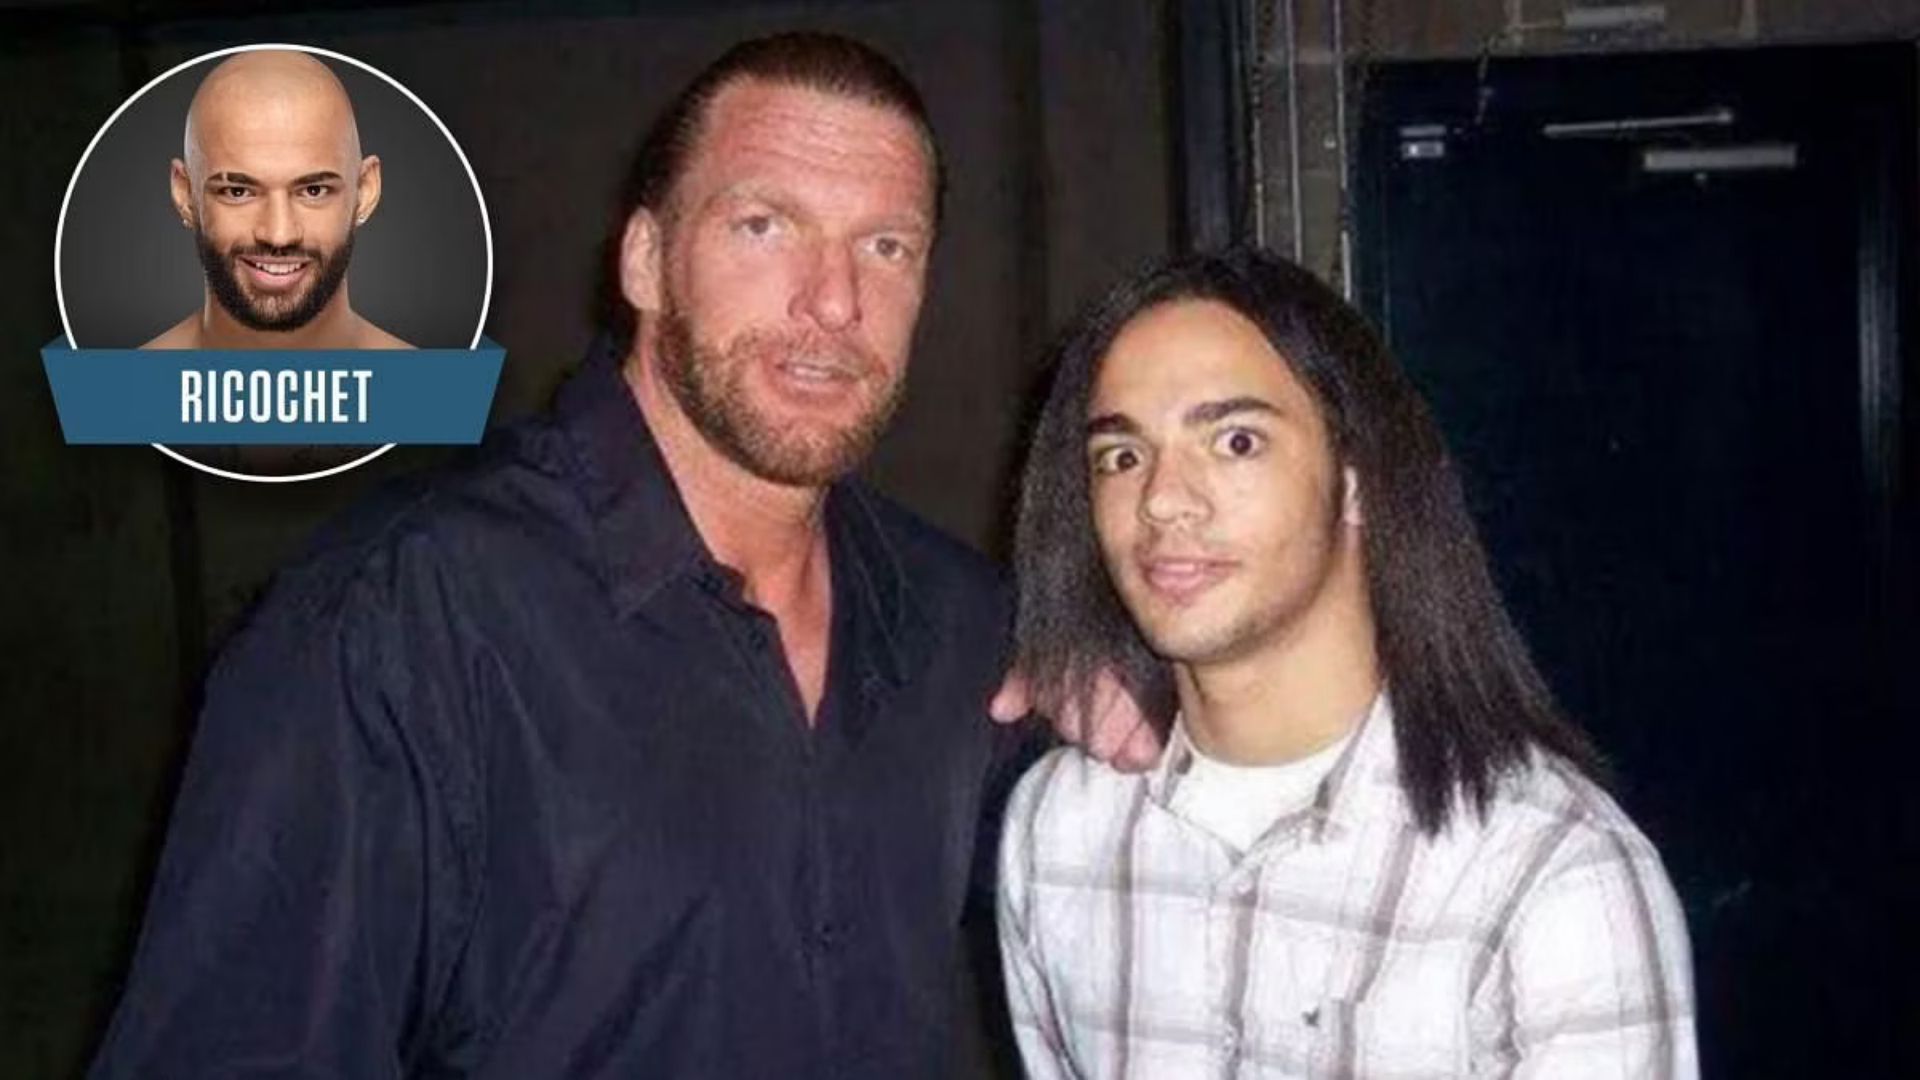 Ricochet in his pre-WWE days with Triple H